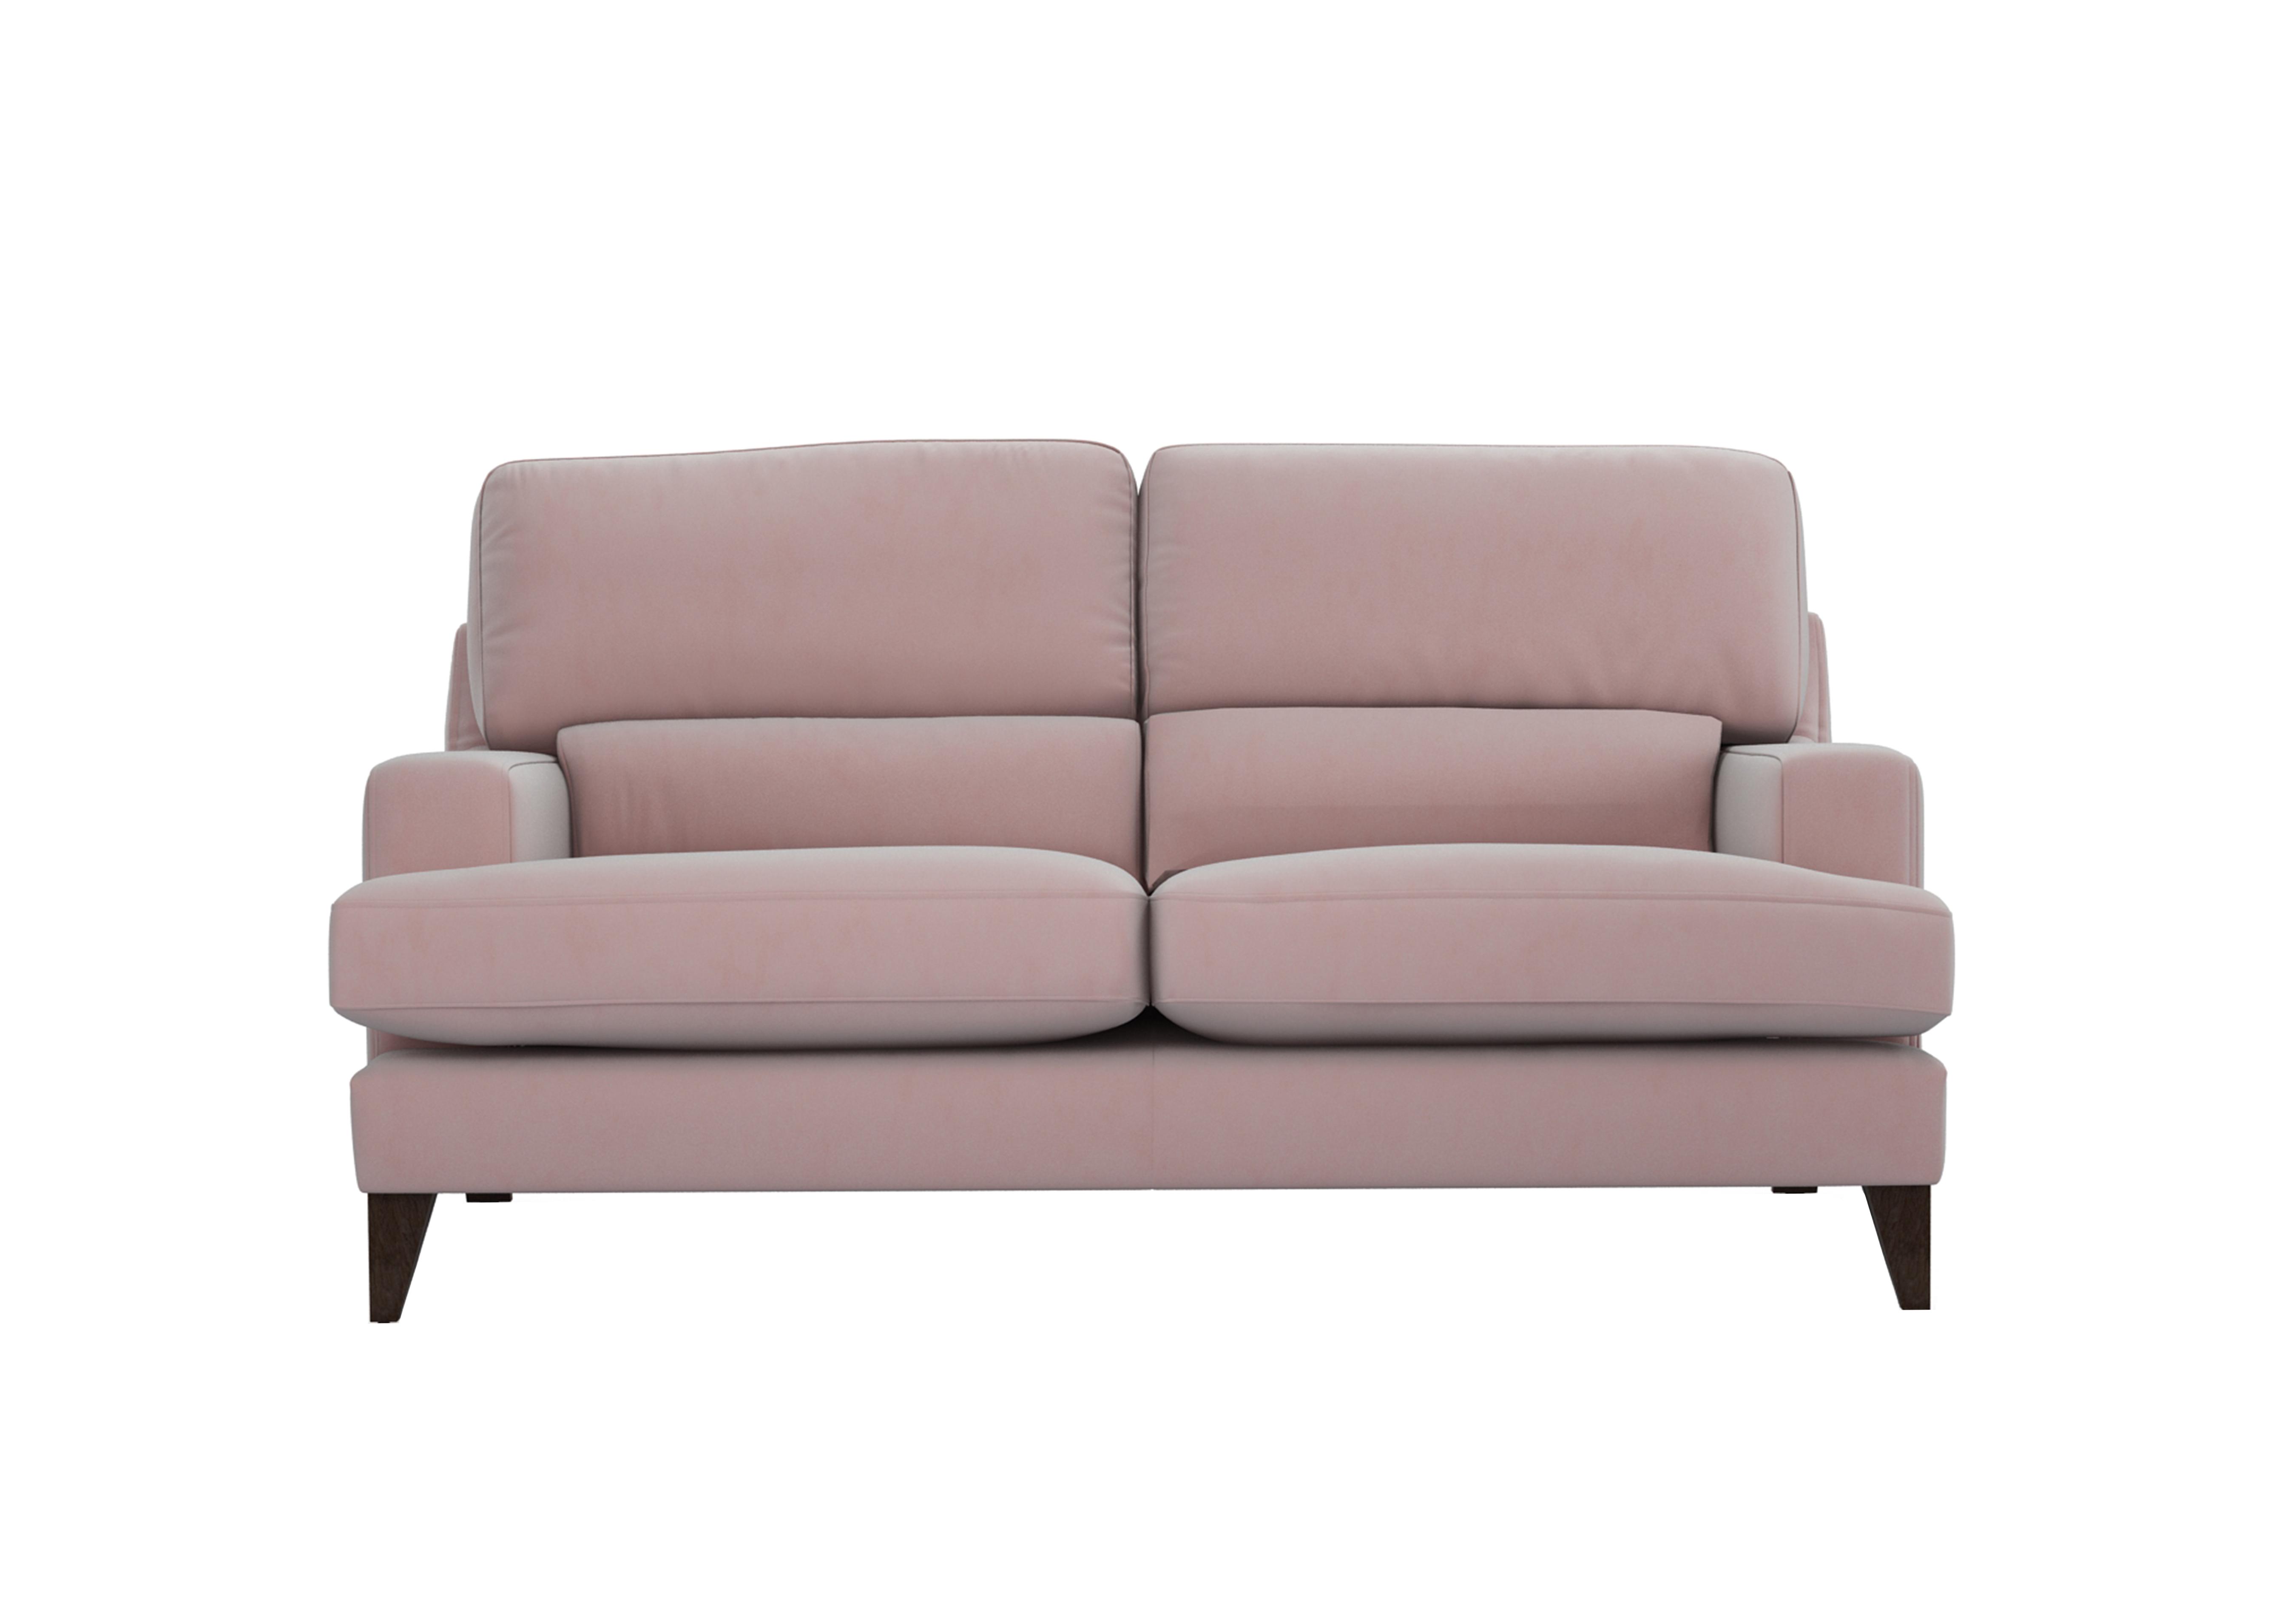 Romilly 2.5 Seater Fabric Sofa in Cot256 Cotton Candy Wa Ft on Furniture Village